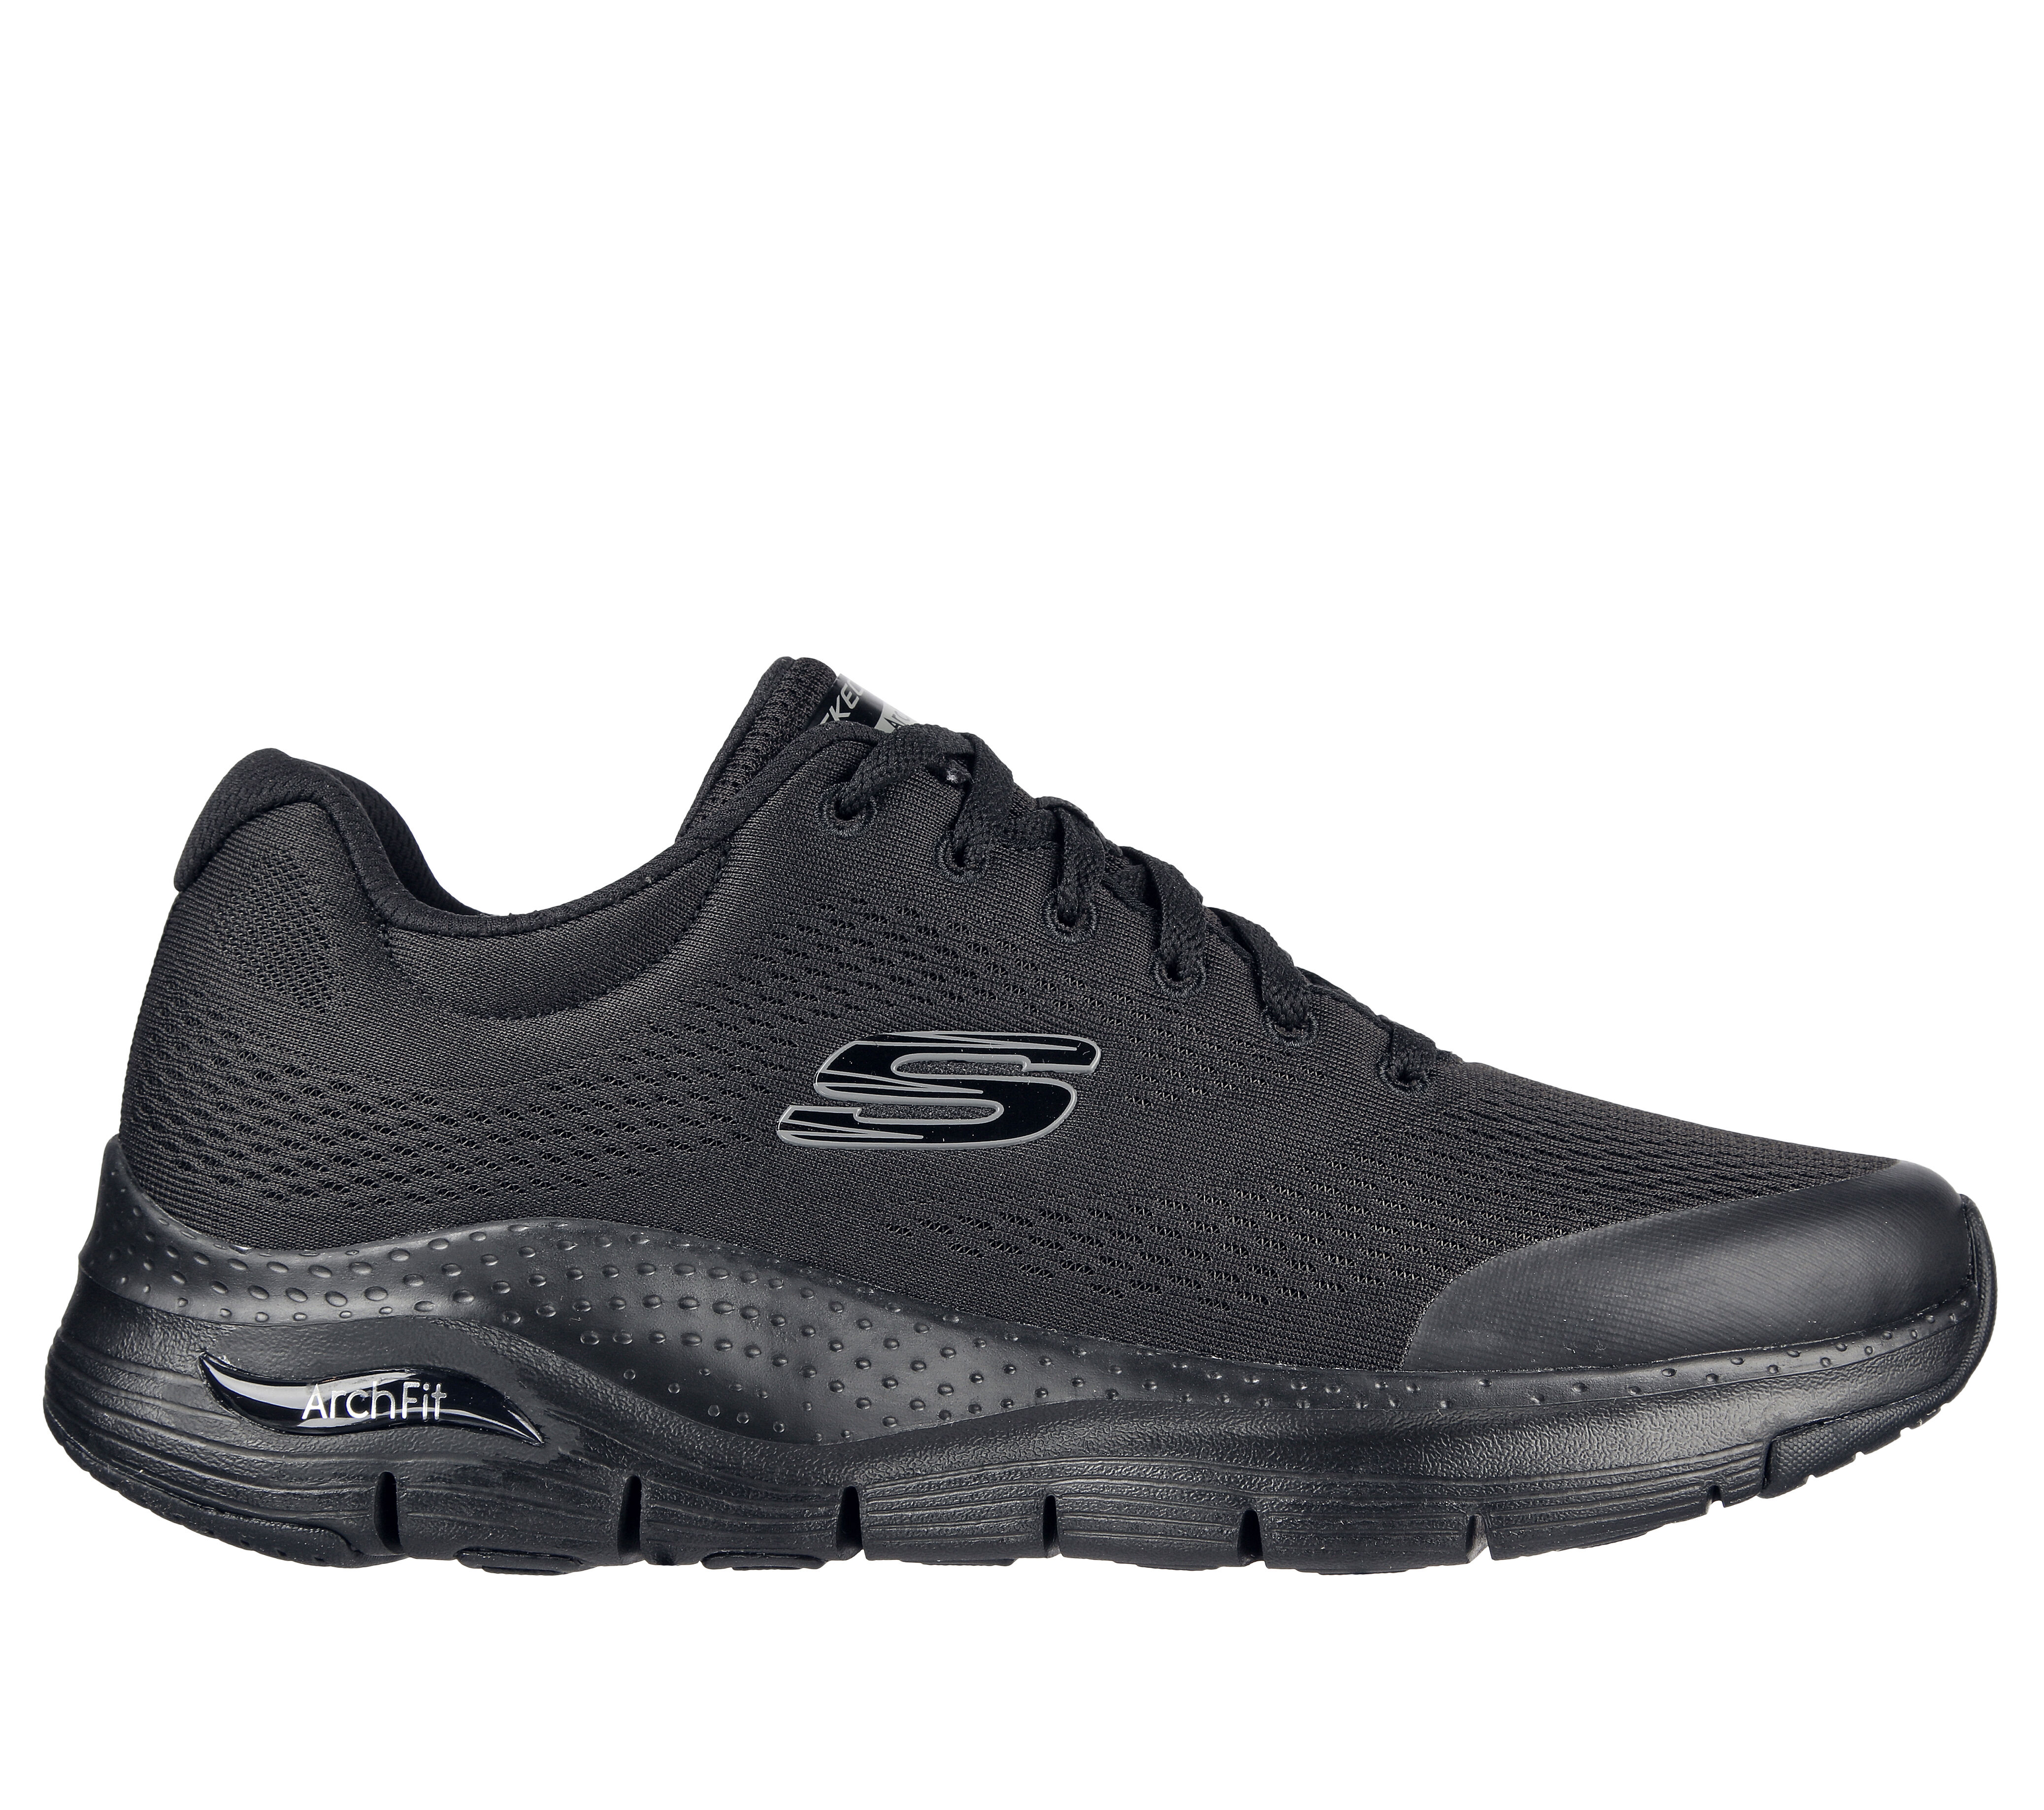 Skechers Arch Fit Men's | Arch Support Shoes | SKECHERS